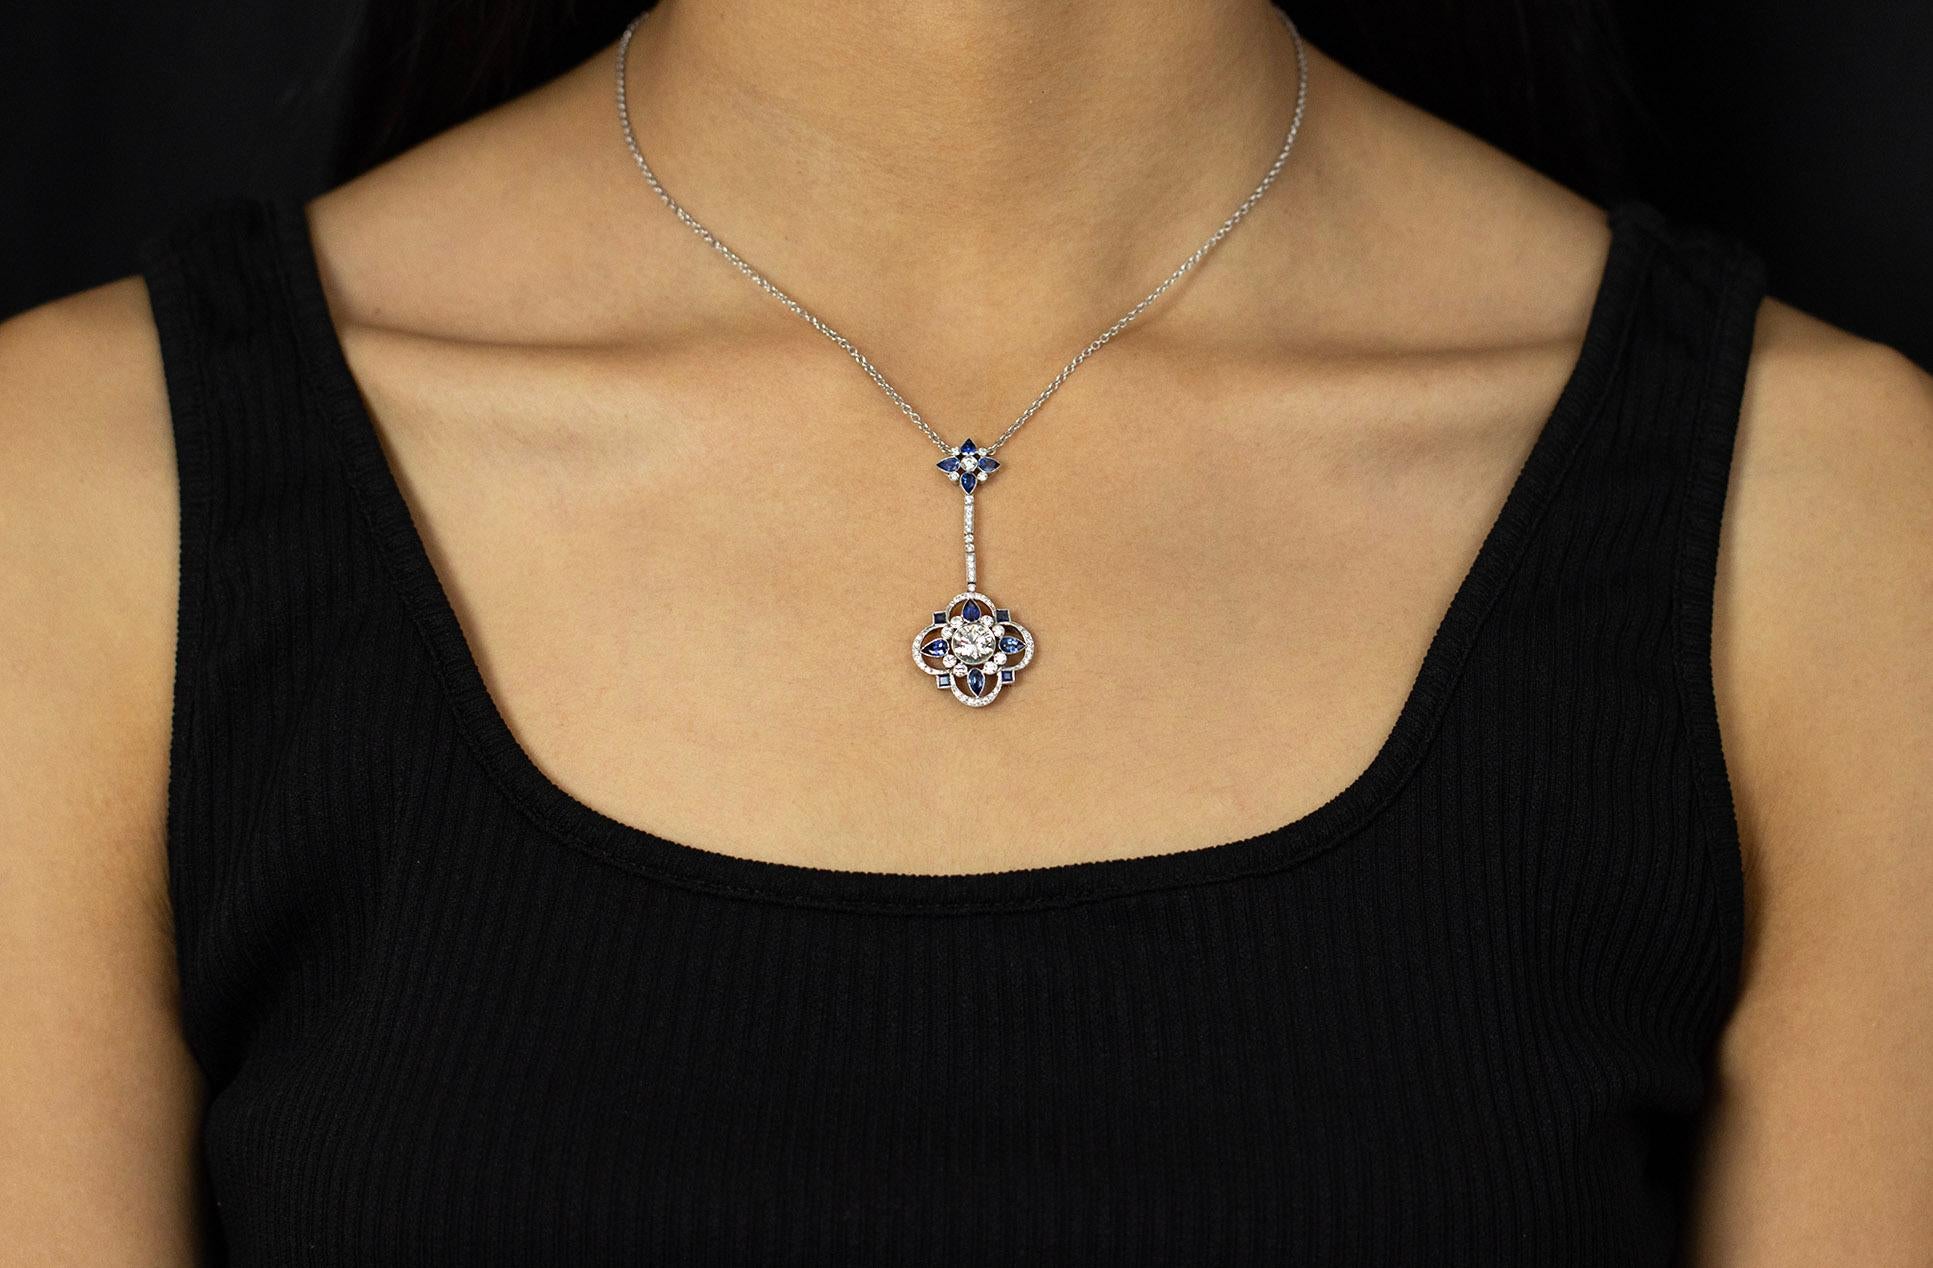 Vintage 3.50 Carats Total Mixed Cut Blue Sapphire and Diamond Pendant Necklace In Good Condition For Sale In New York, NY